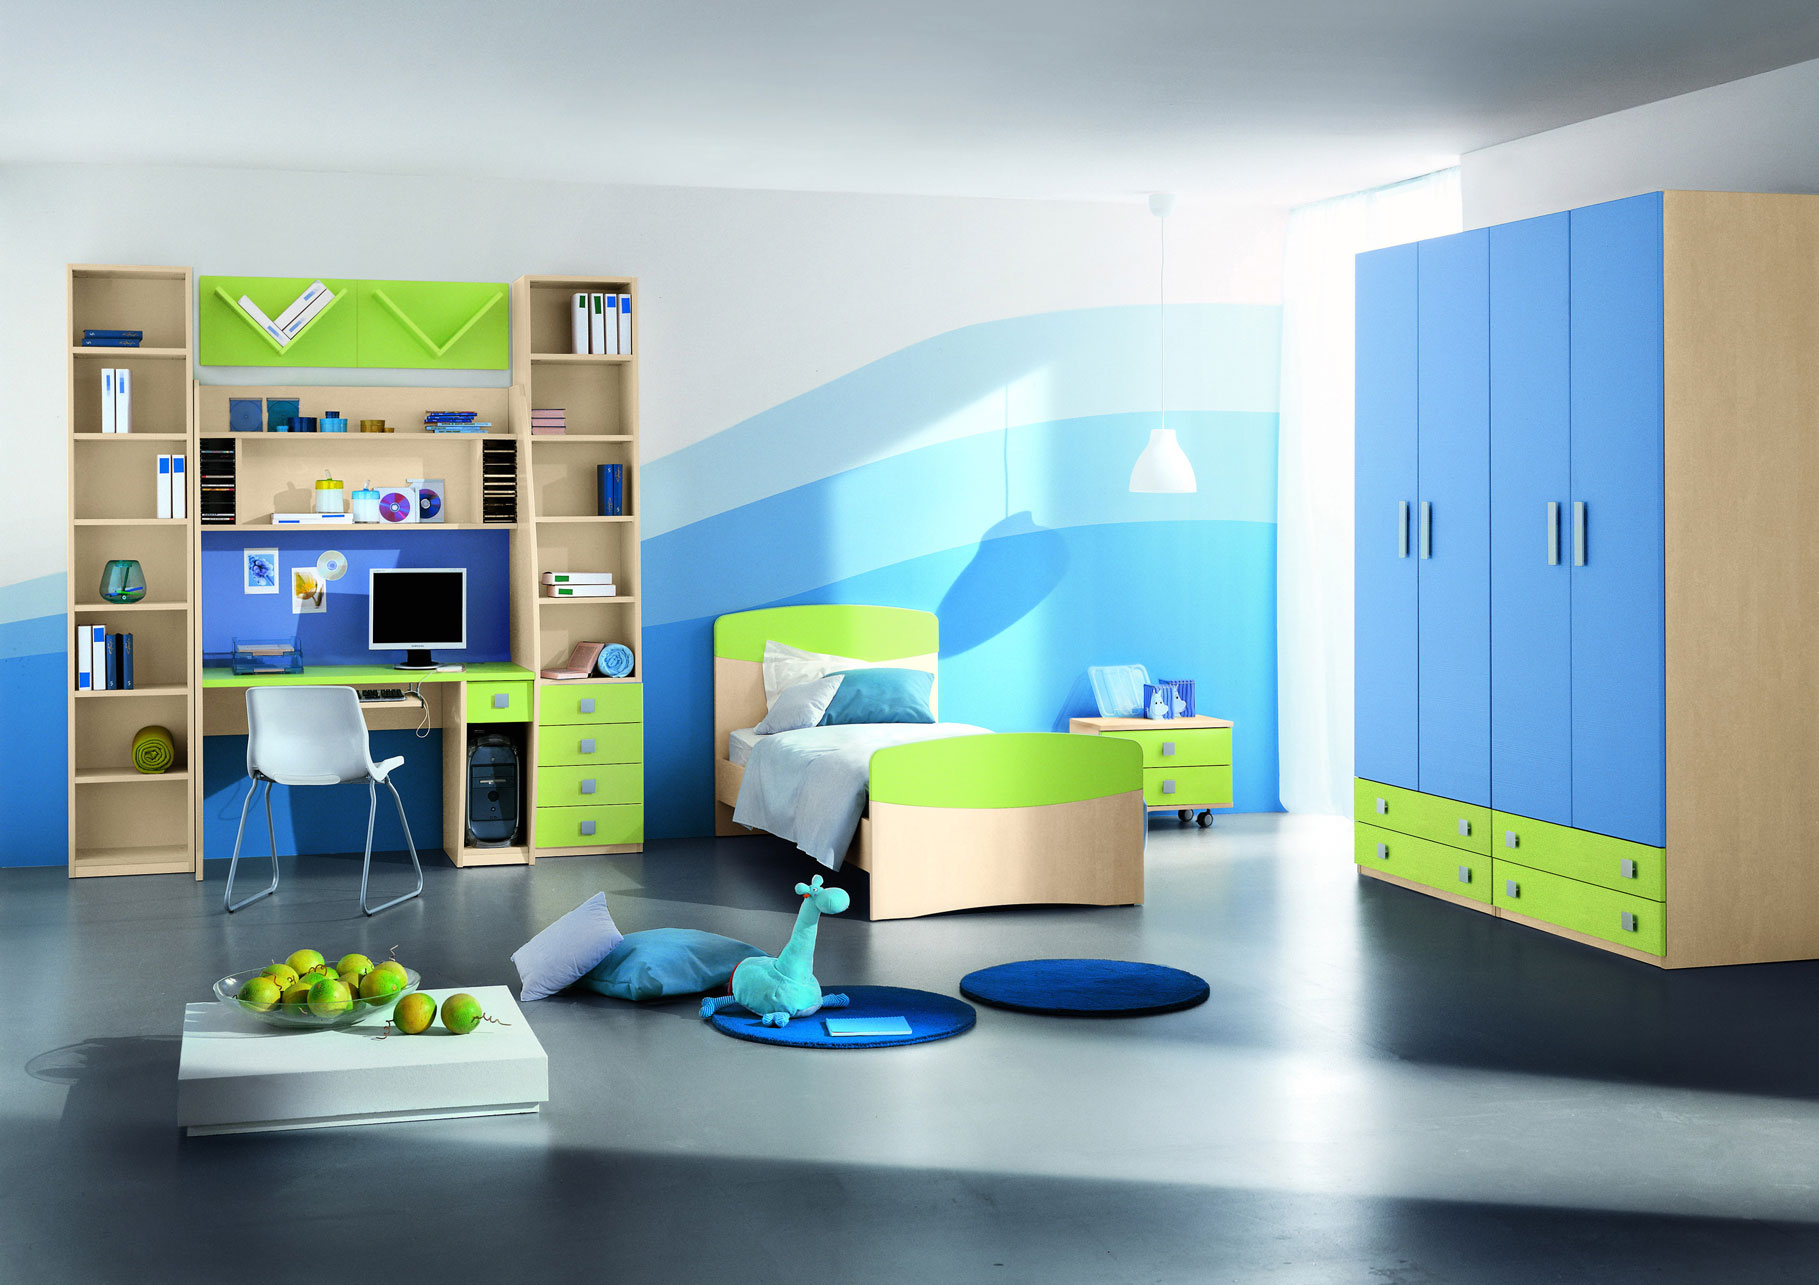 Innovative Green and Blue Interior Design Ideas for Kid Bedroom with Single Bed and Wonderful Study Space